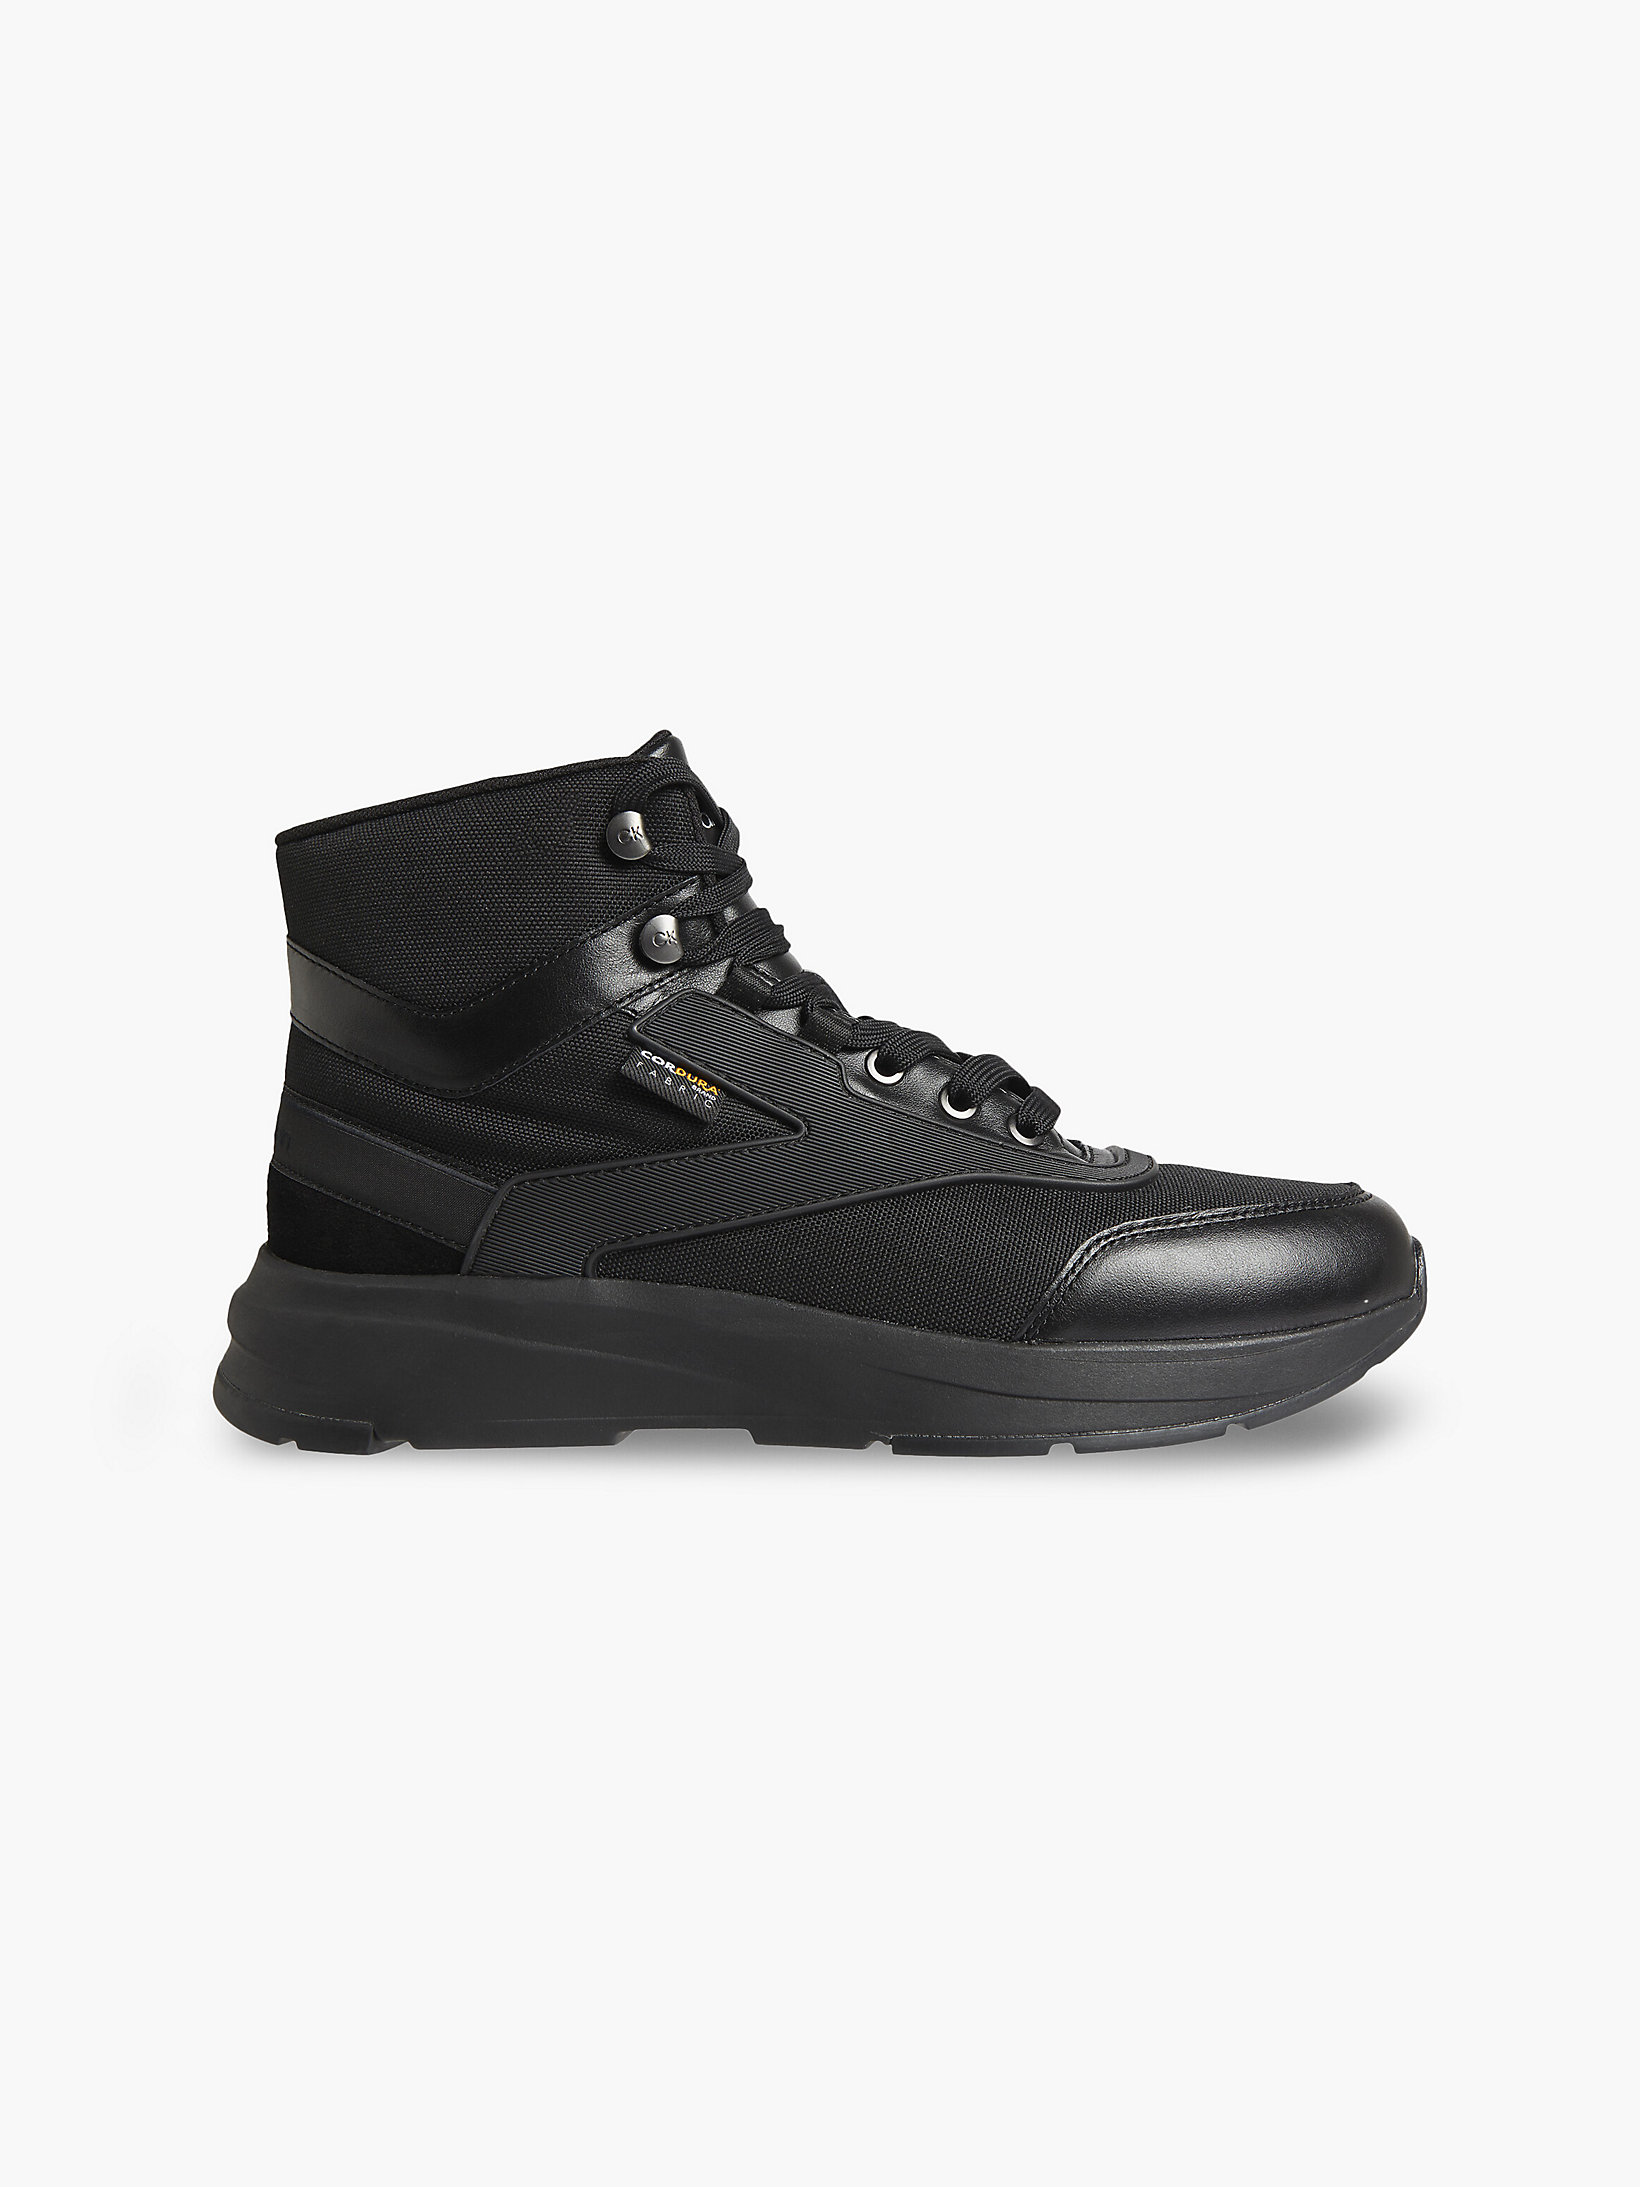 Pvh Black Recycled High-Top Trainers undefined men Calvin Klein